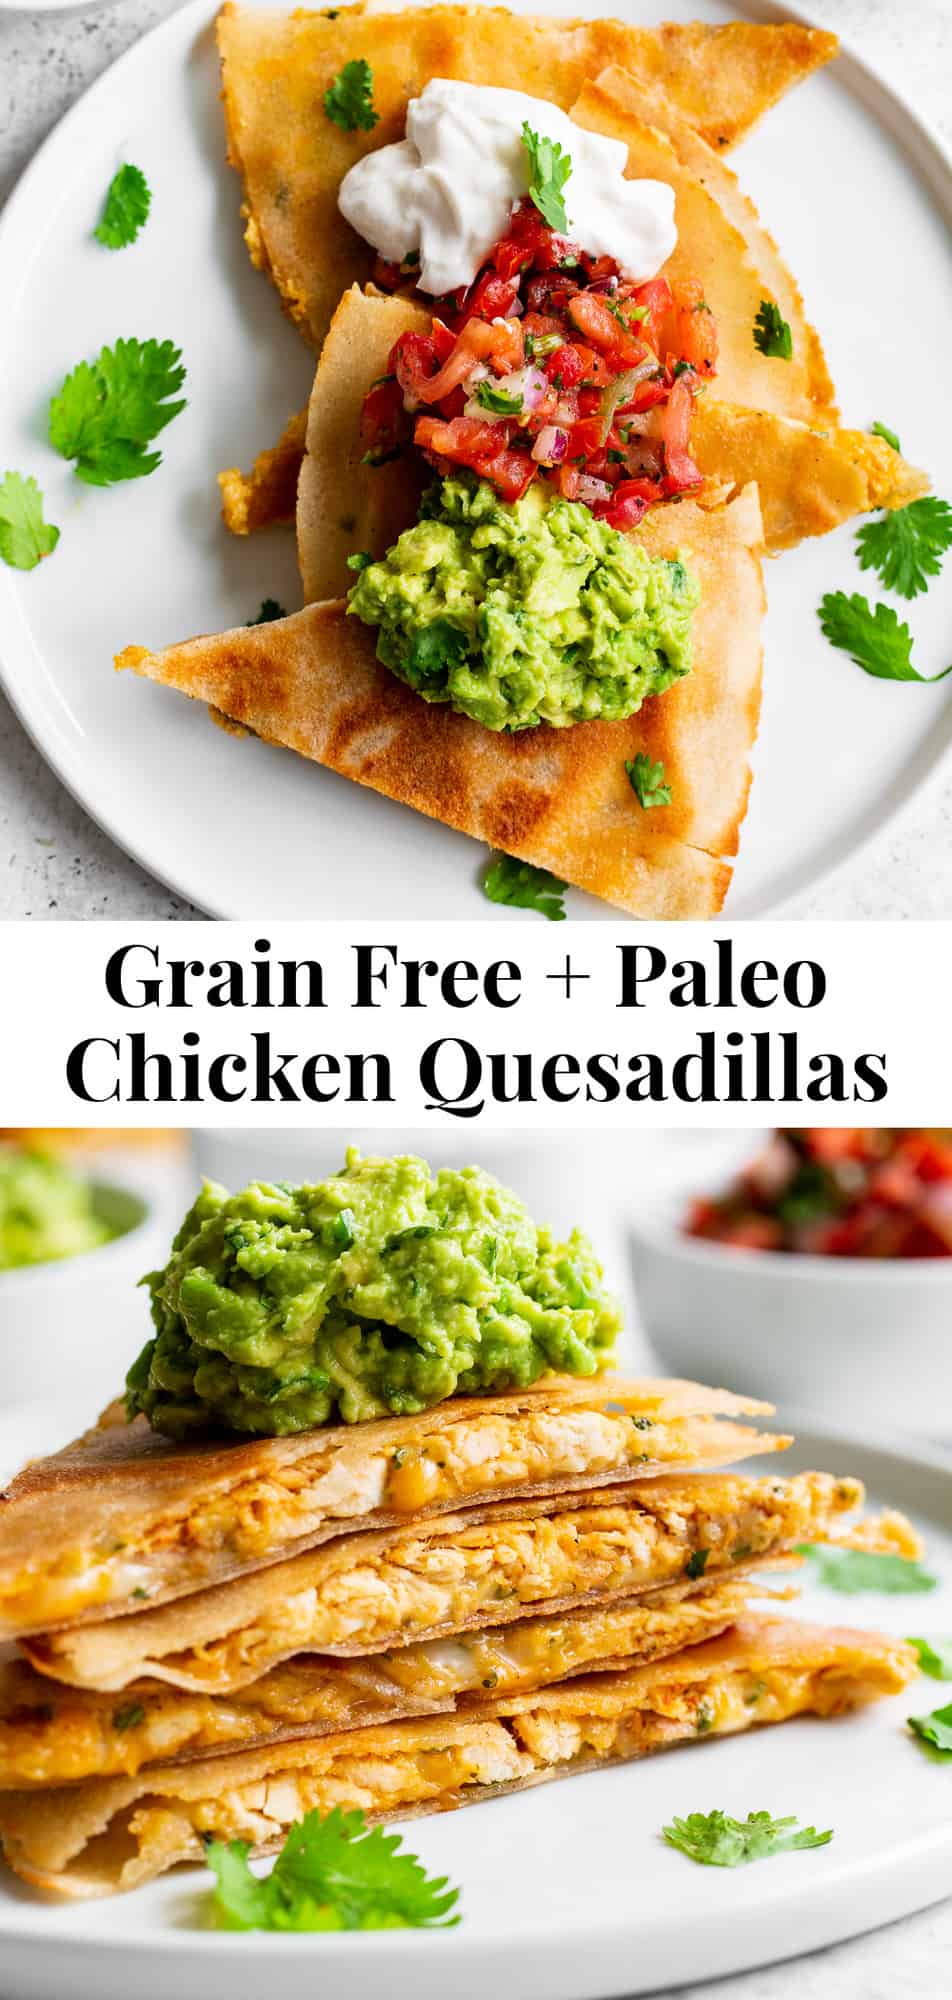 These paleo chicken quesadillas are completely grain free and dairy free but you’d never guess! Grain free tortillas are filled with seasoned chicken and a flavor packed creamy cashew cheese sauce then topped with all your favorites like guacamole, fresh salsa and dairy free sour cream! Perfect as an appetizer or meal and totally kid approved! #paleo #cleaneating 